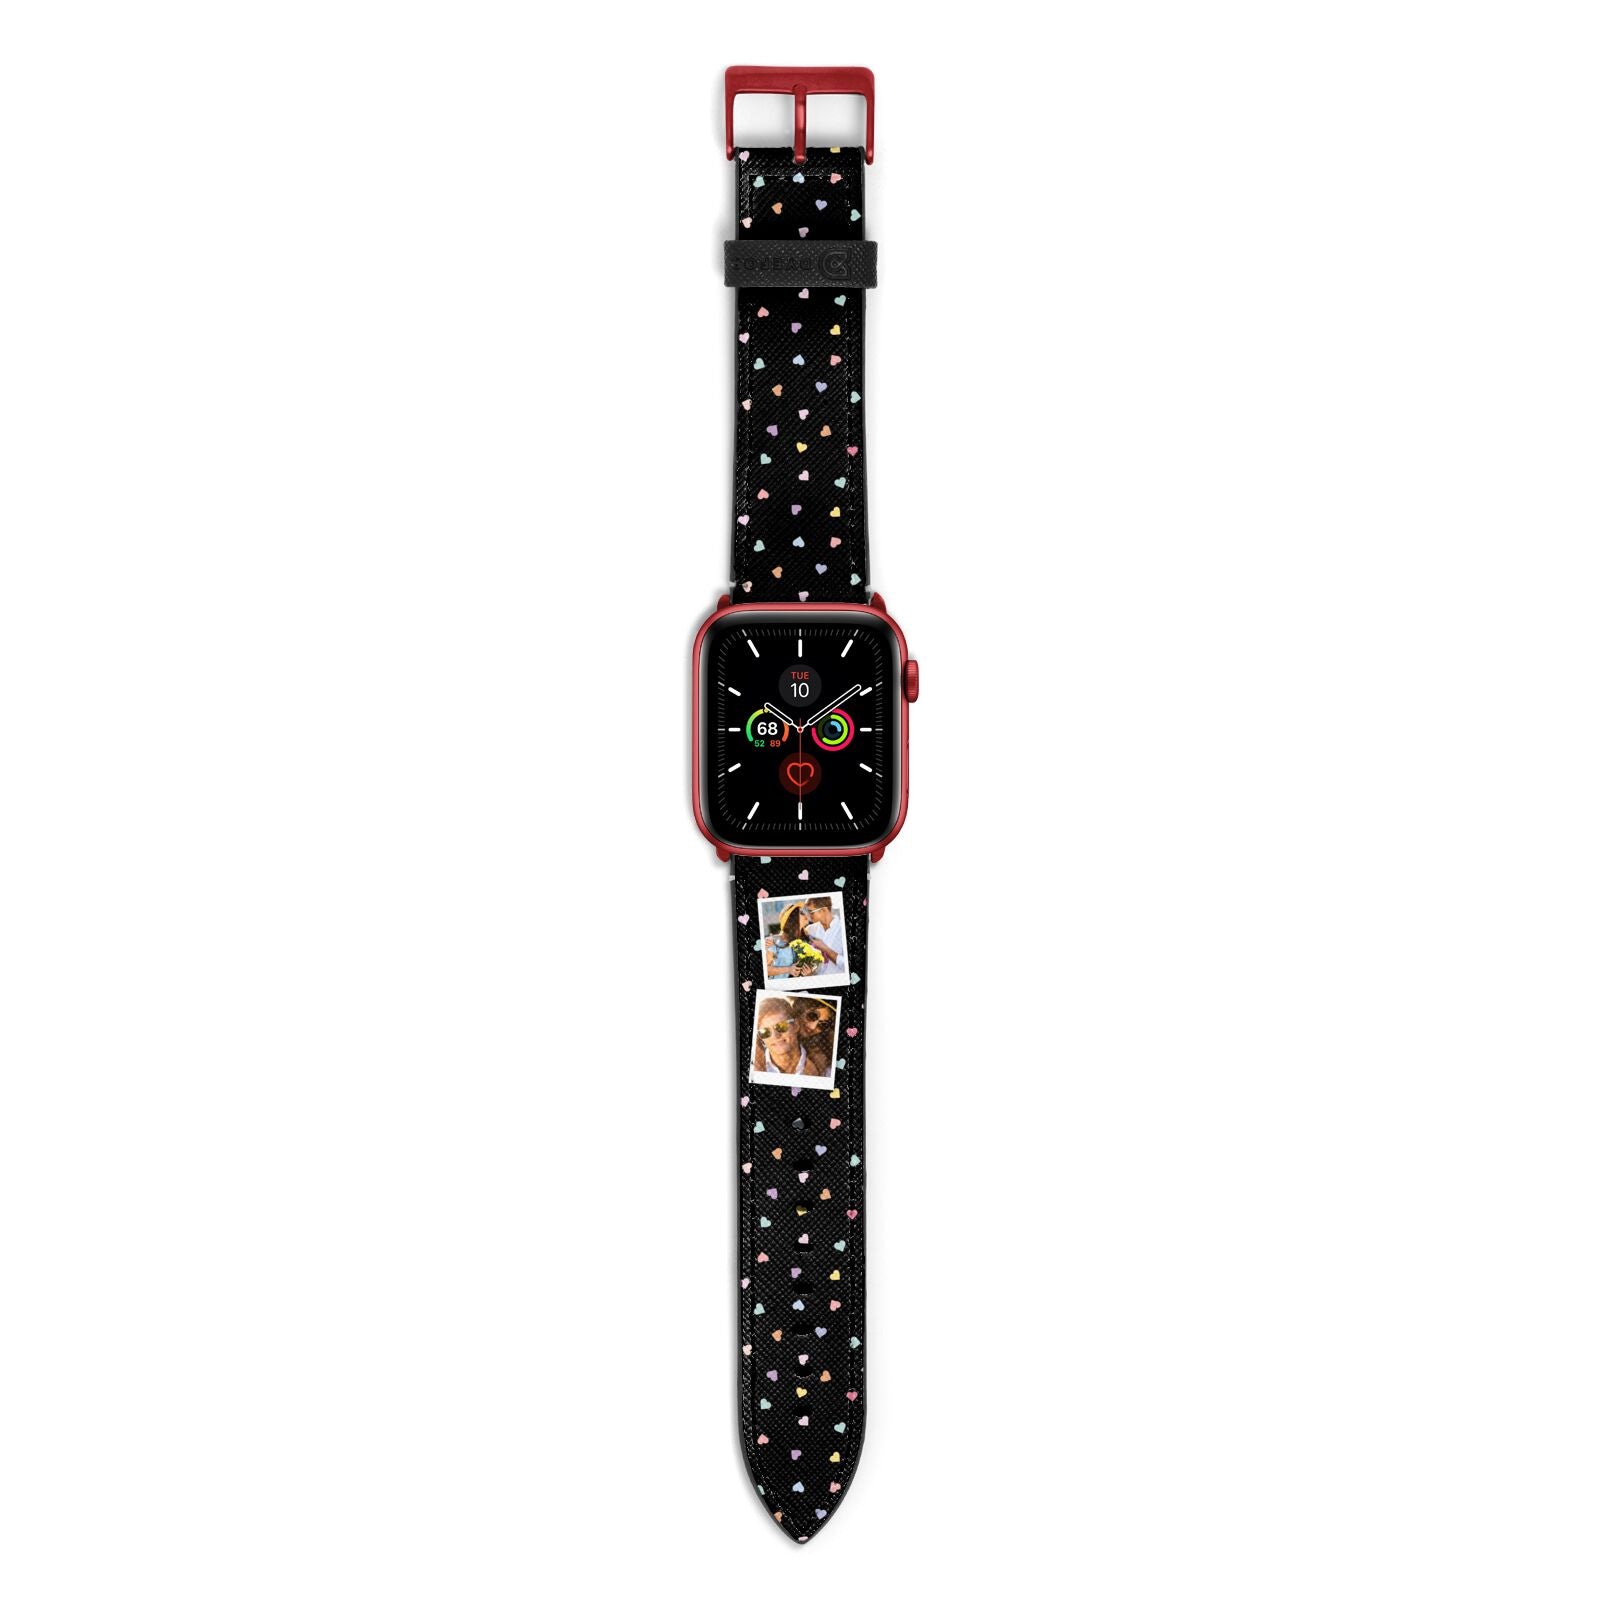 Confetti Heart Photo Apple Watch Strap with Red Hardware